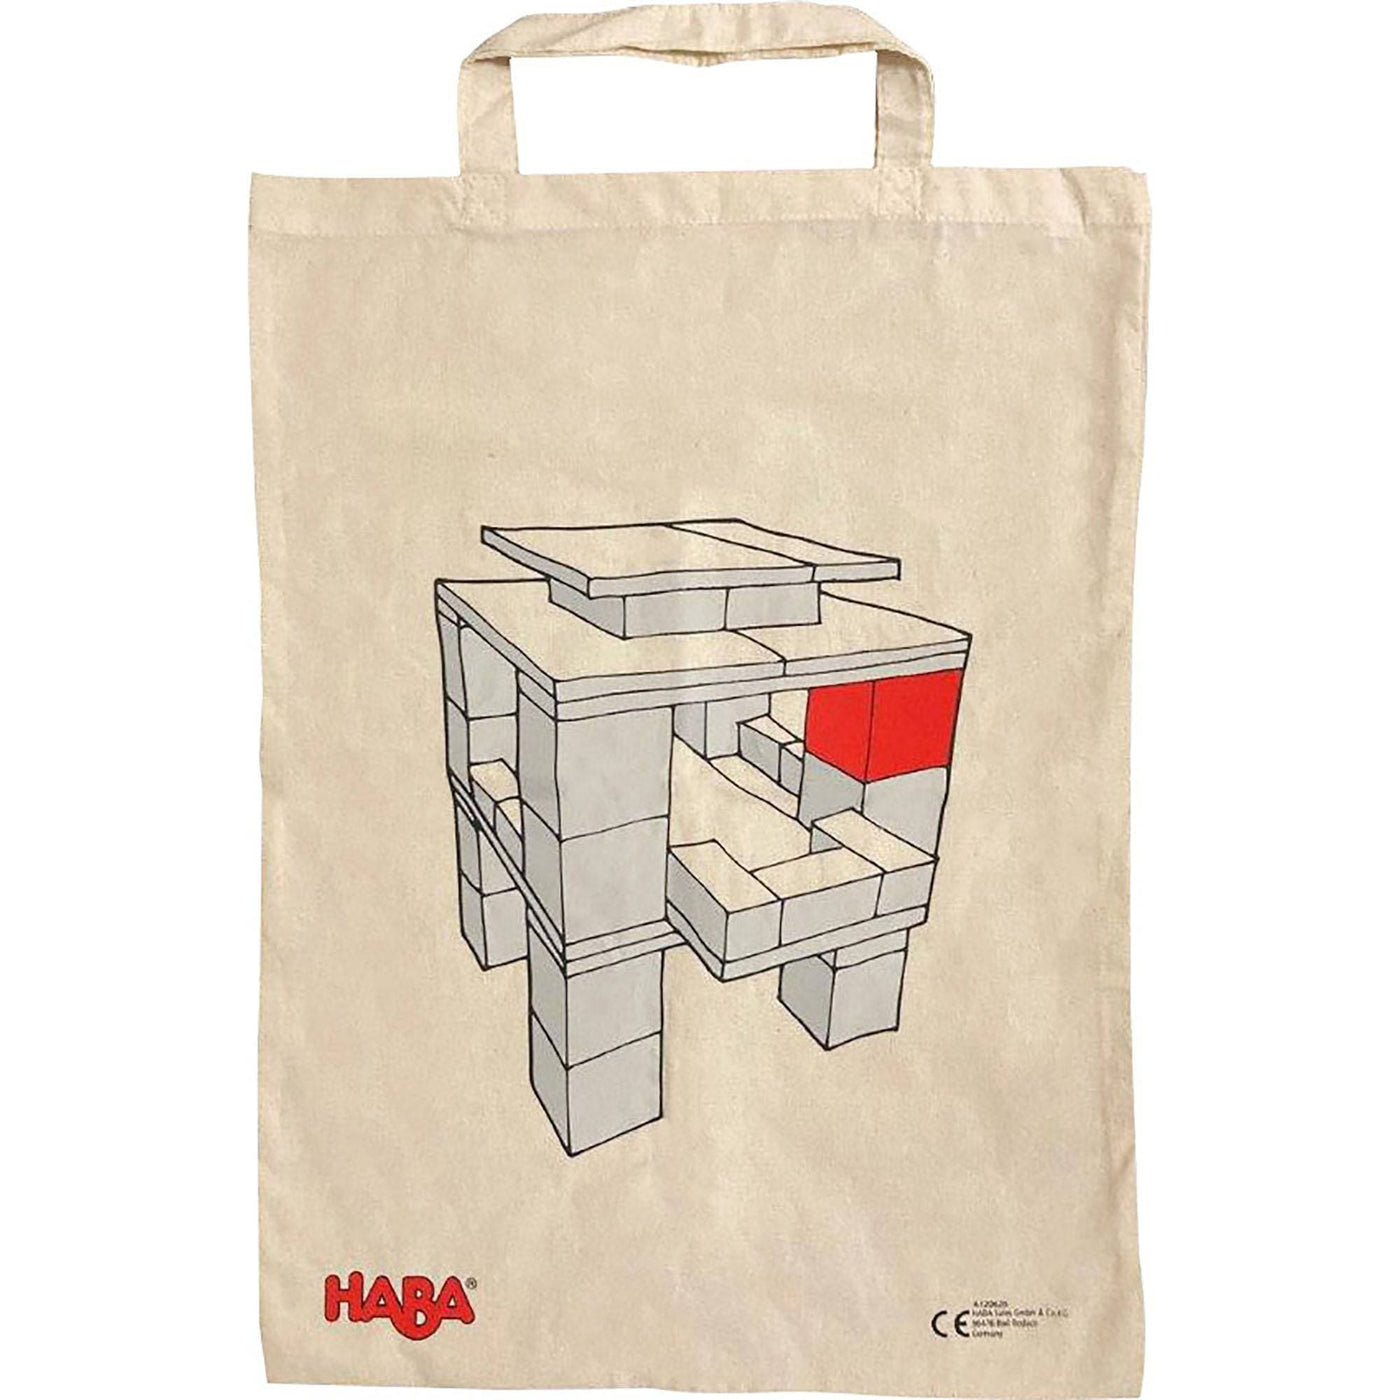 HABA Clever Up! Building Block System 3.0